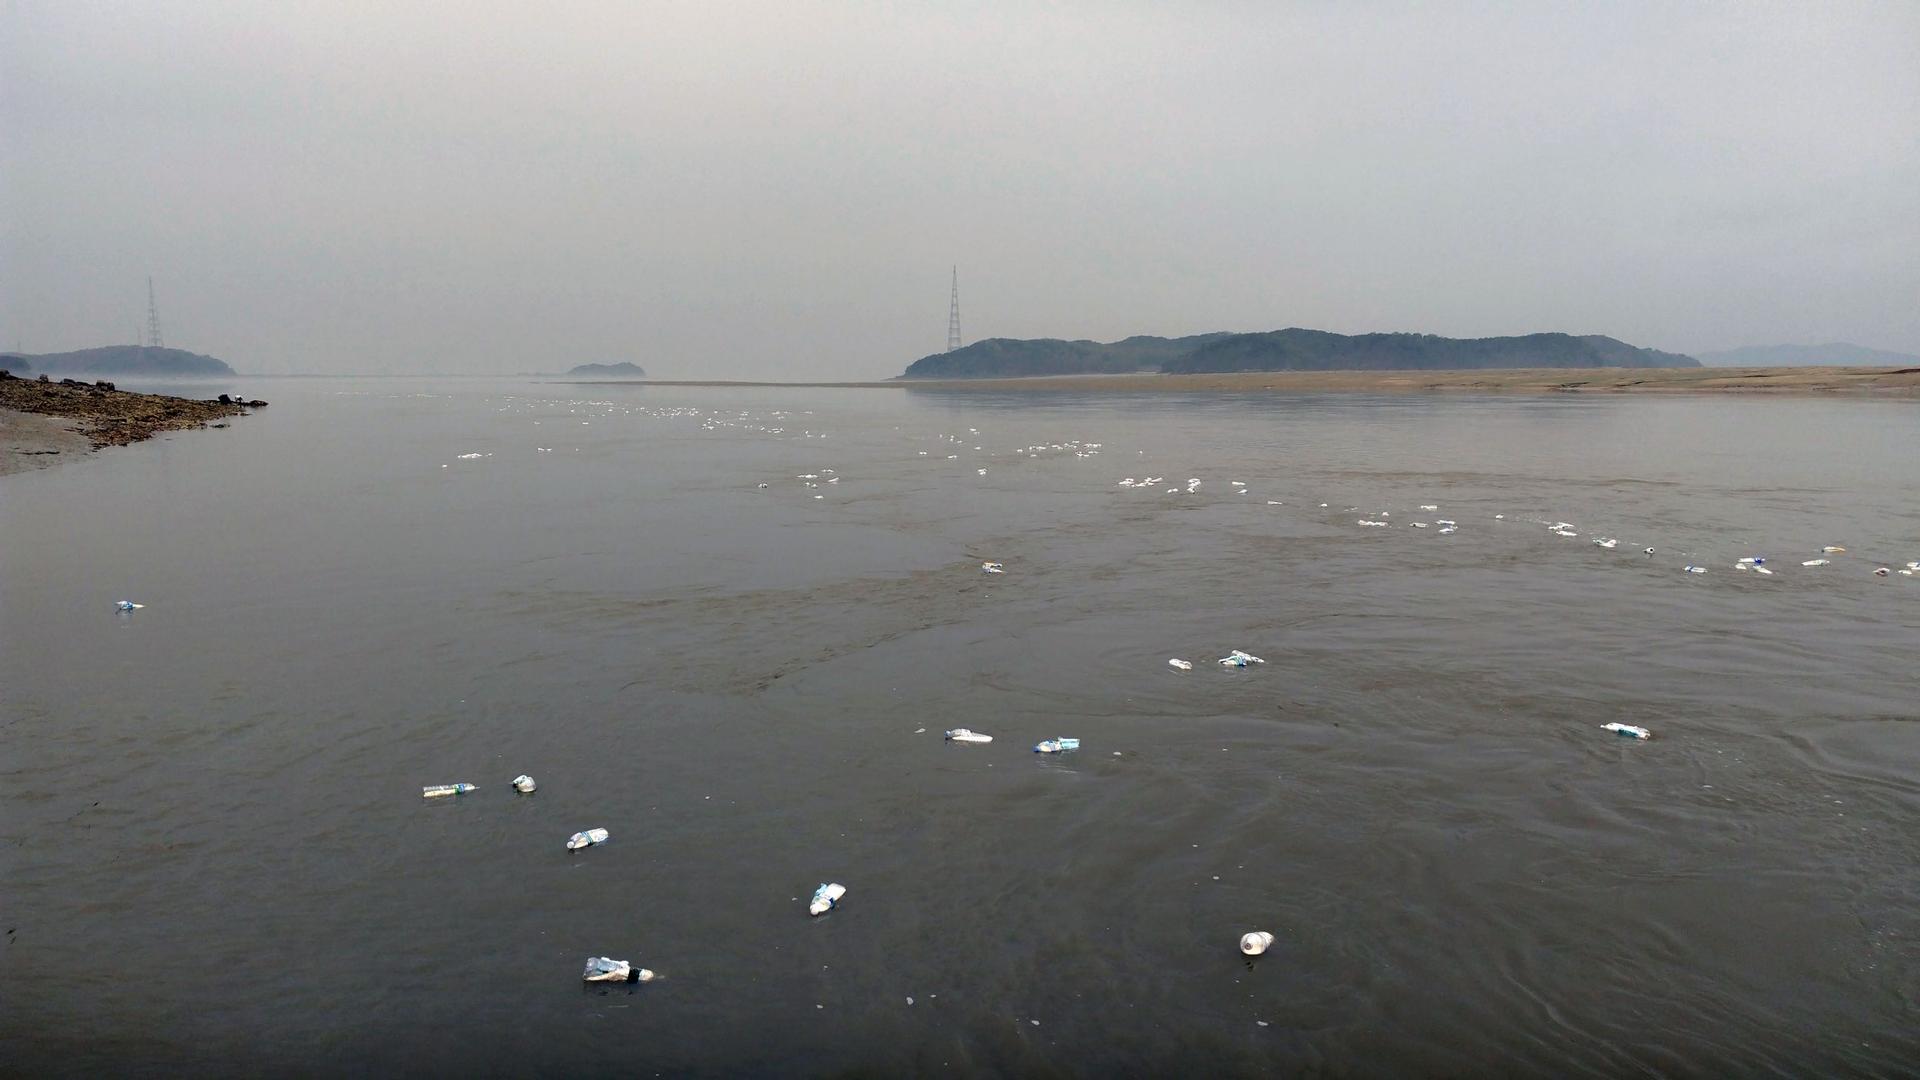 Dots of white are water bottles filled with rice and USB drives as they float in the sea, hopefully washing up in North Korea.